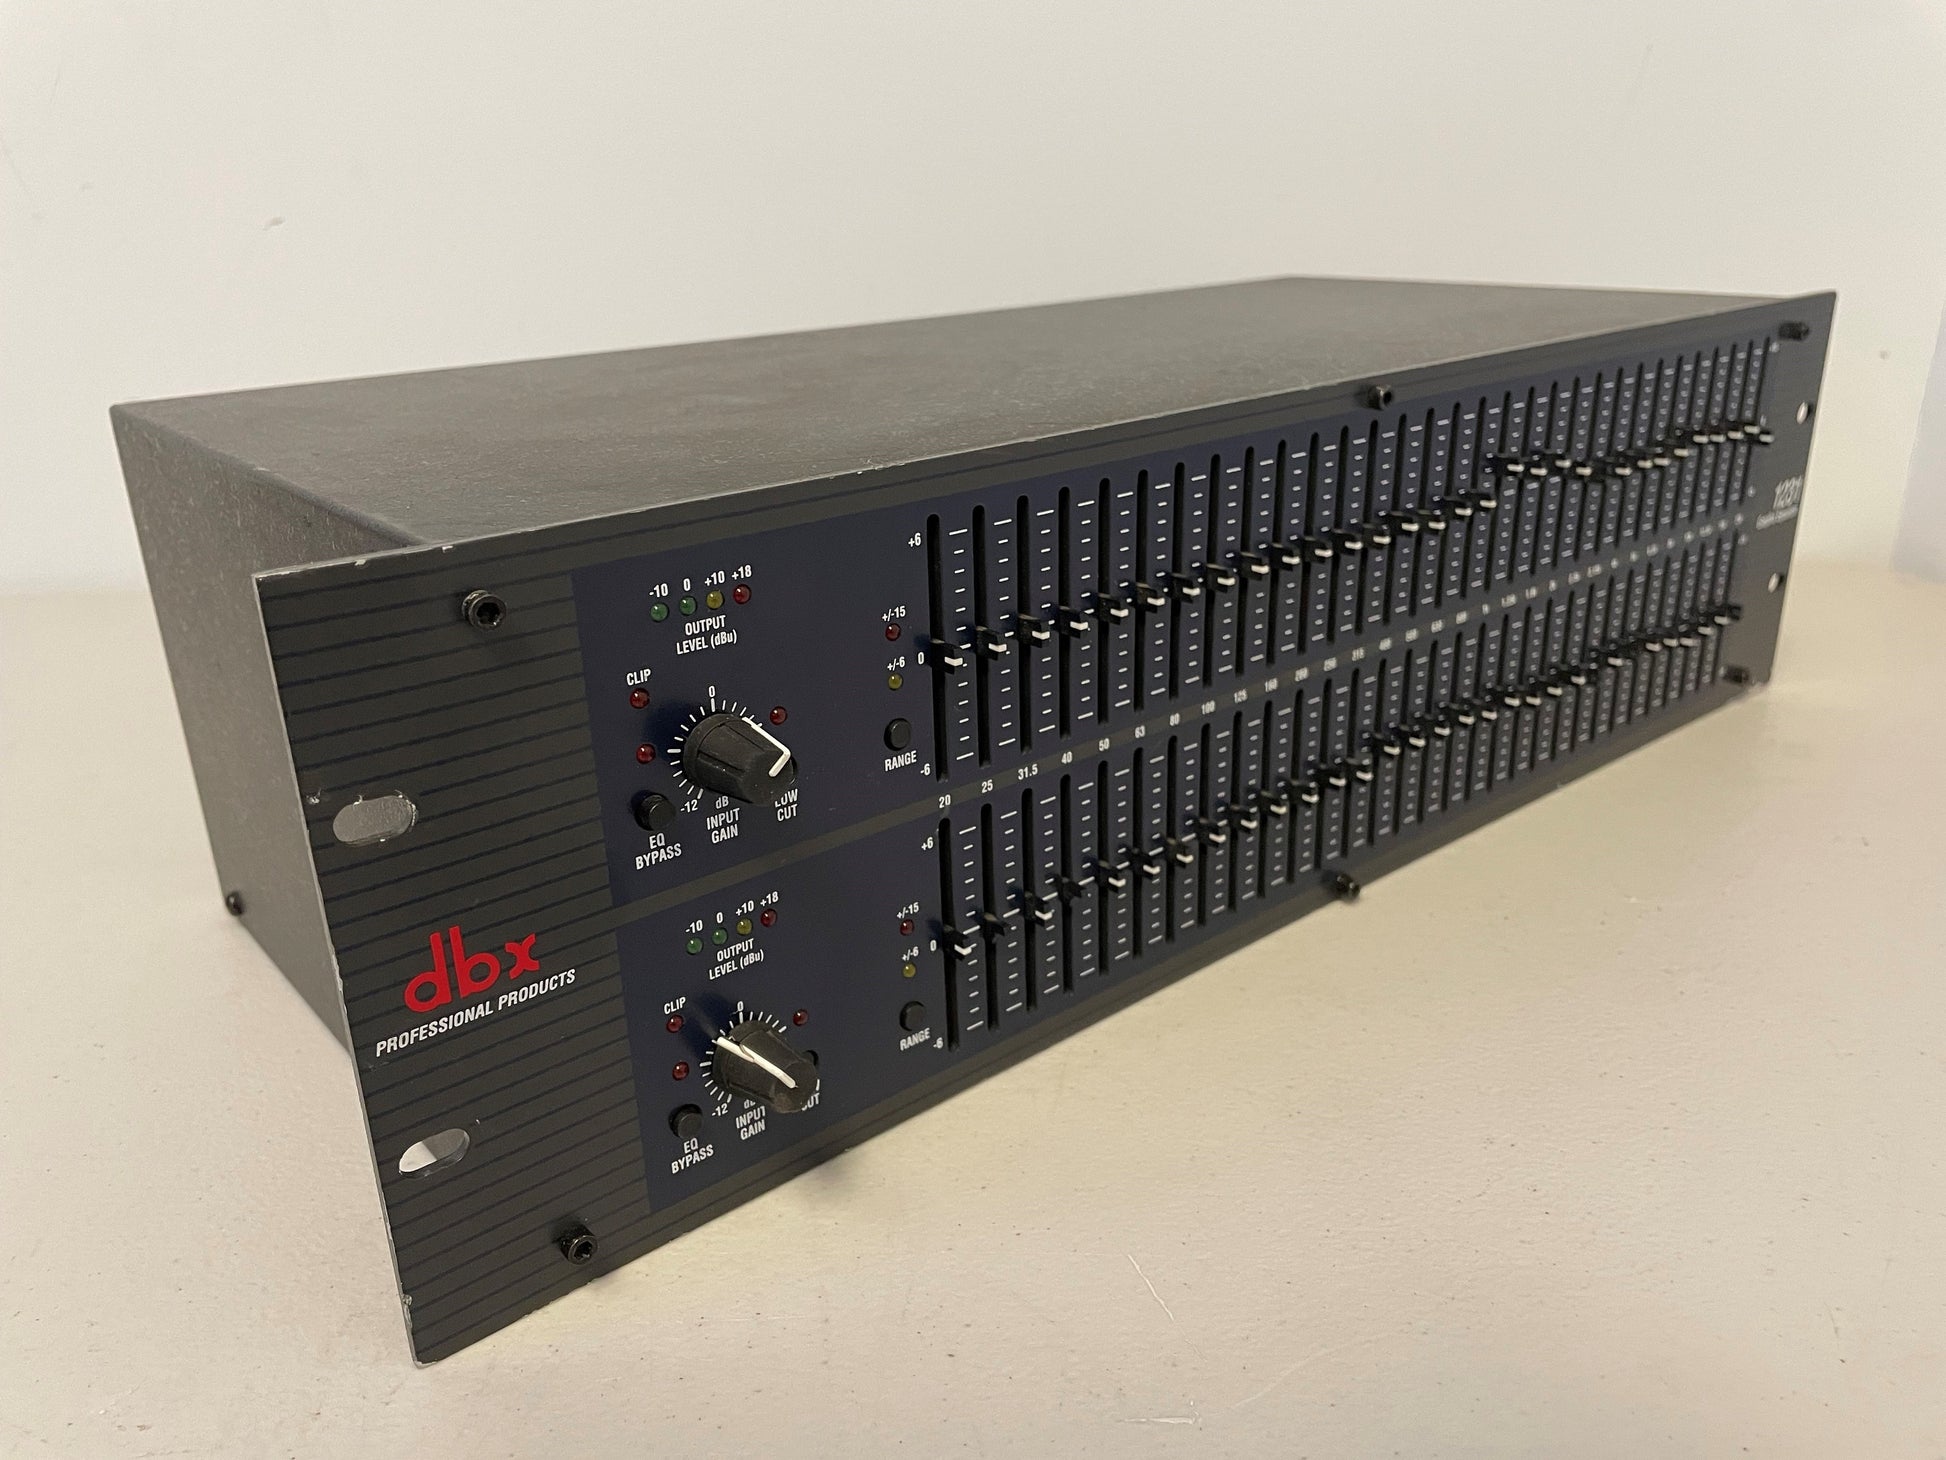 Used dbx 1231 Graphic Equalizer for Sale. We Sell Professional Audio Equipment. Audio Systems, Amplifiers, Consoles, Mixers, Electronics, Entertainment, Sound, Live.